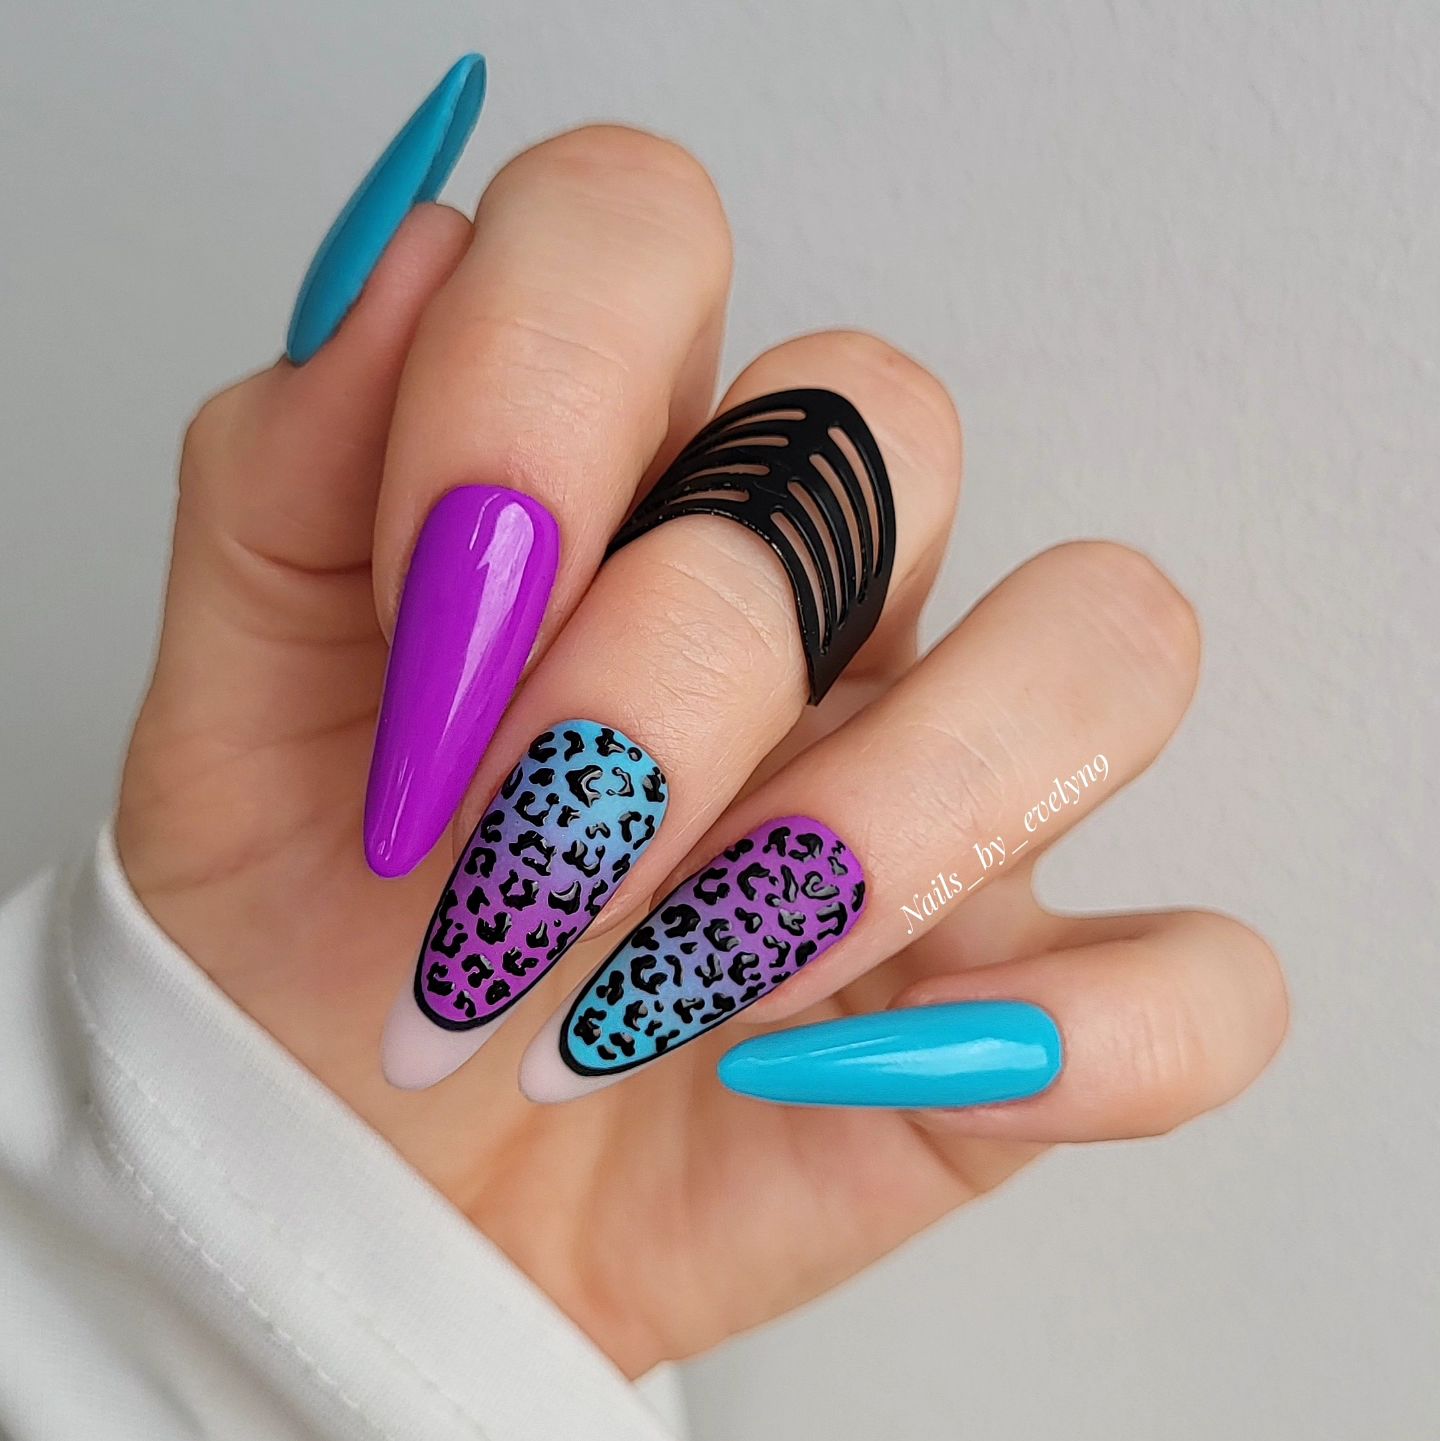 Blue and Purple Nails with Leopard Print